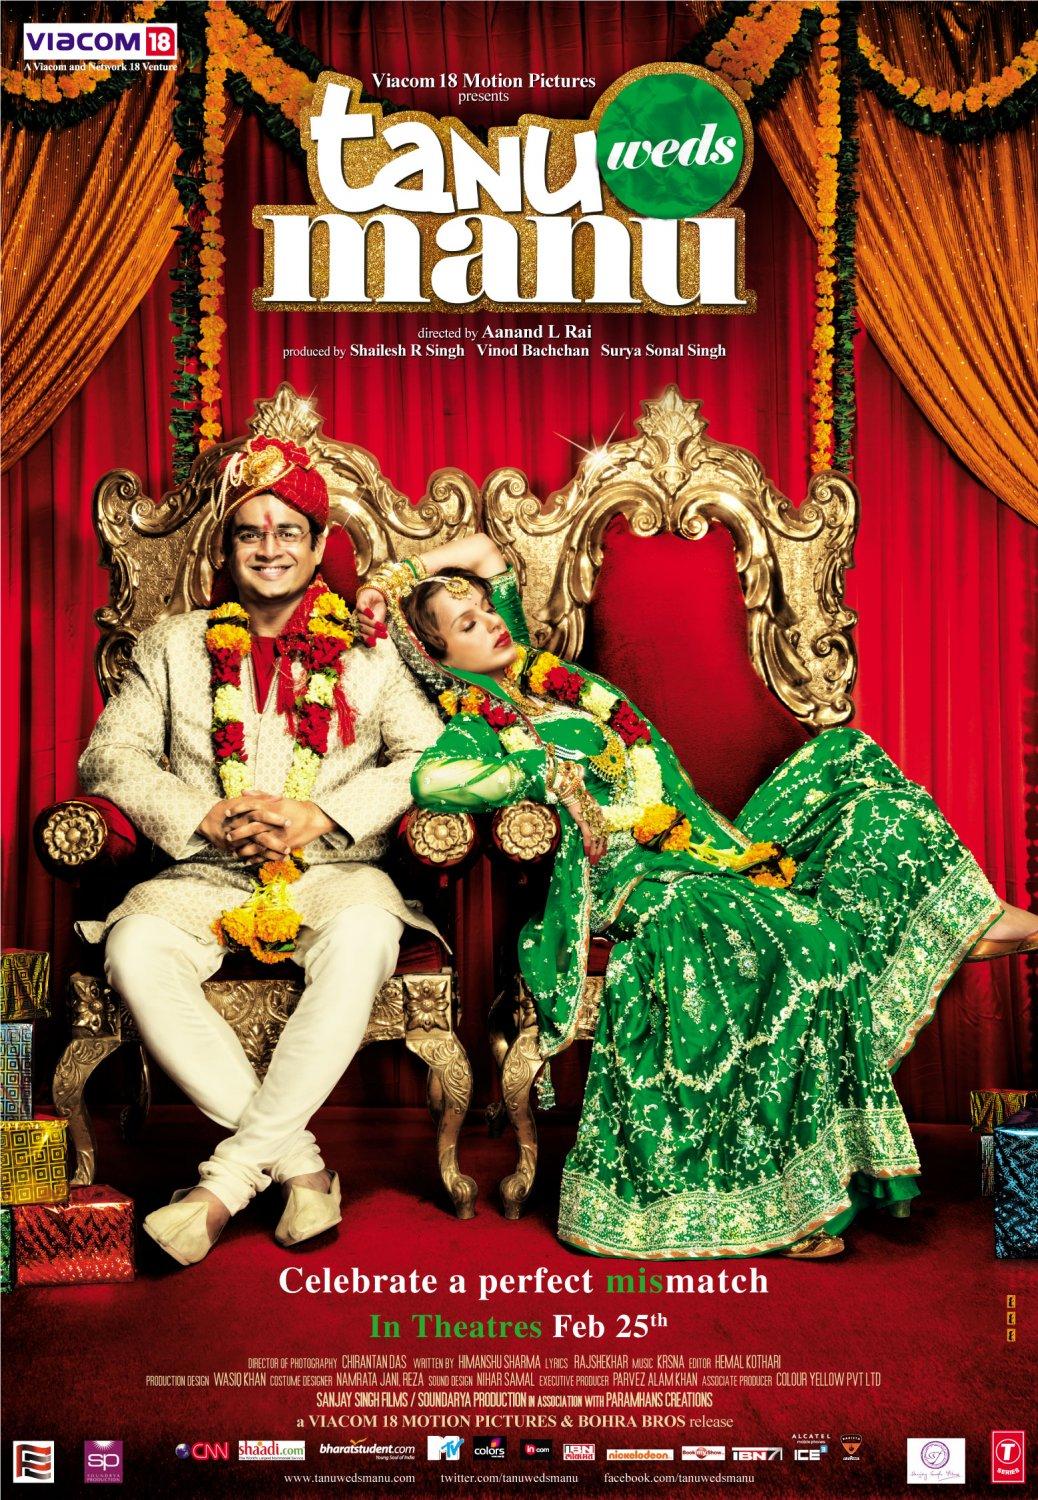 Tanu Weds Manu Returns: A zany romantic comedy sequel that follows the tumultuous married life of a couple with contrasting personalities.